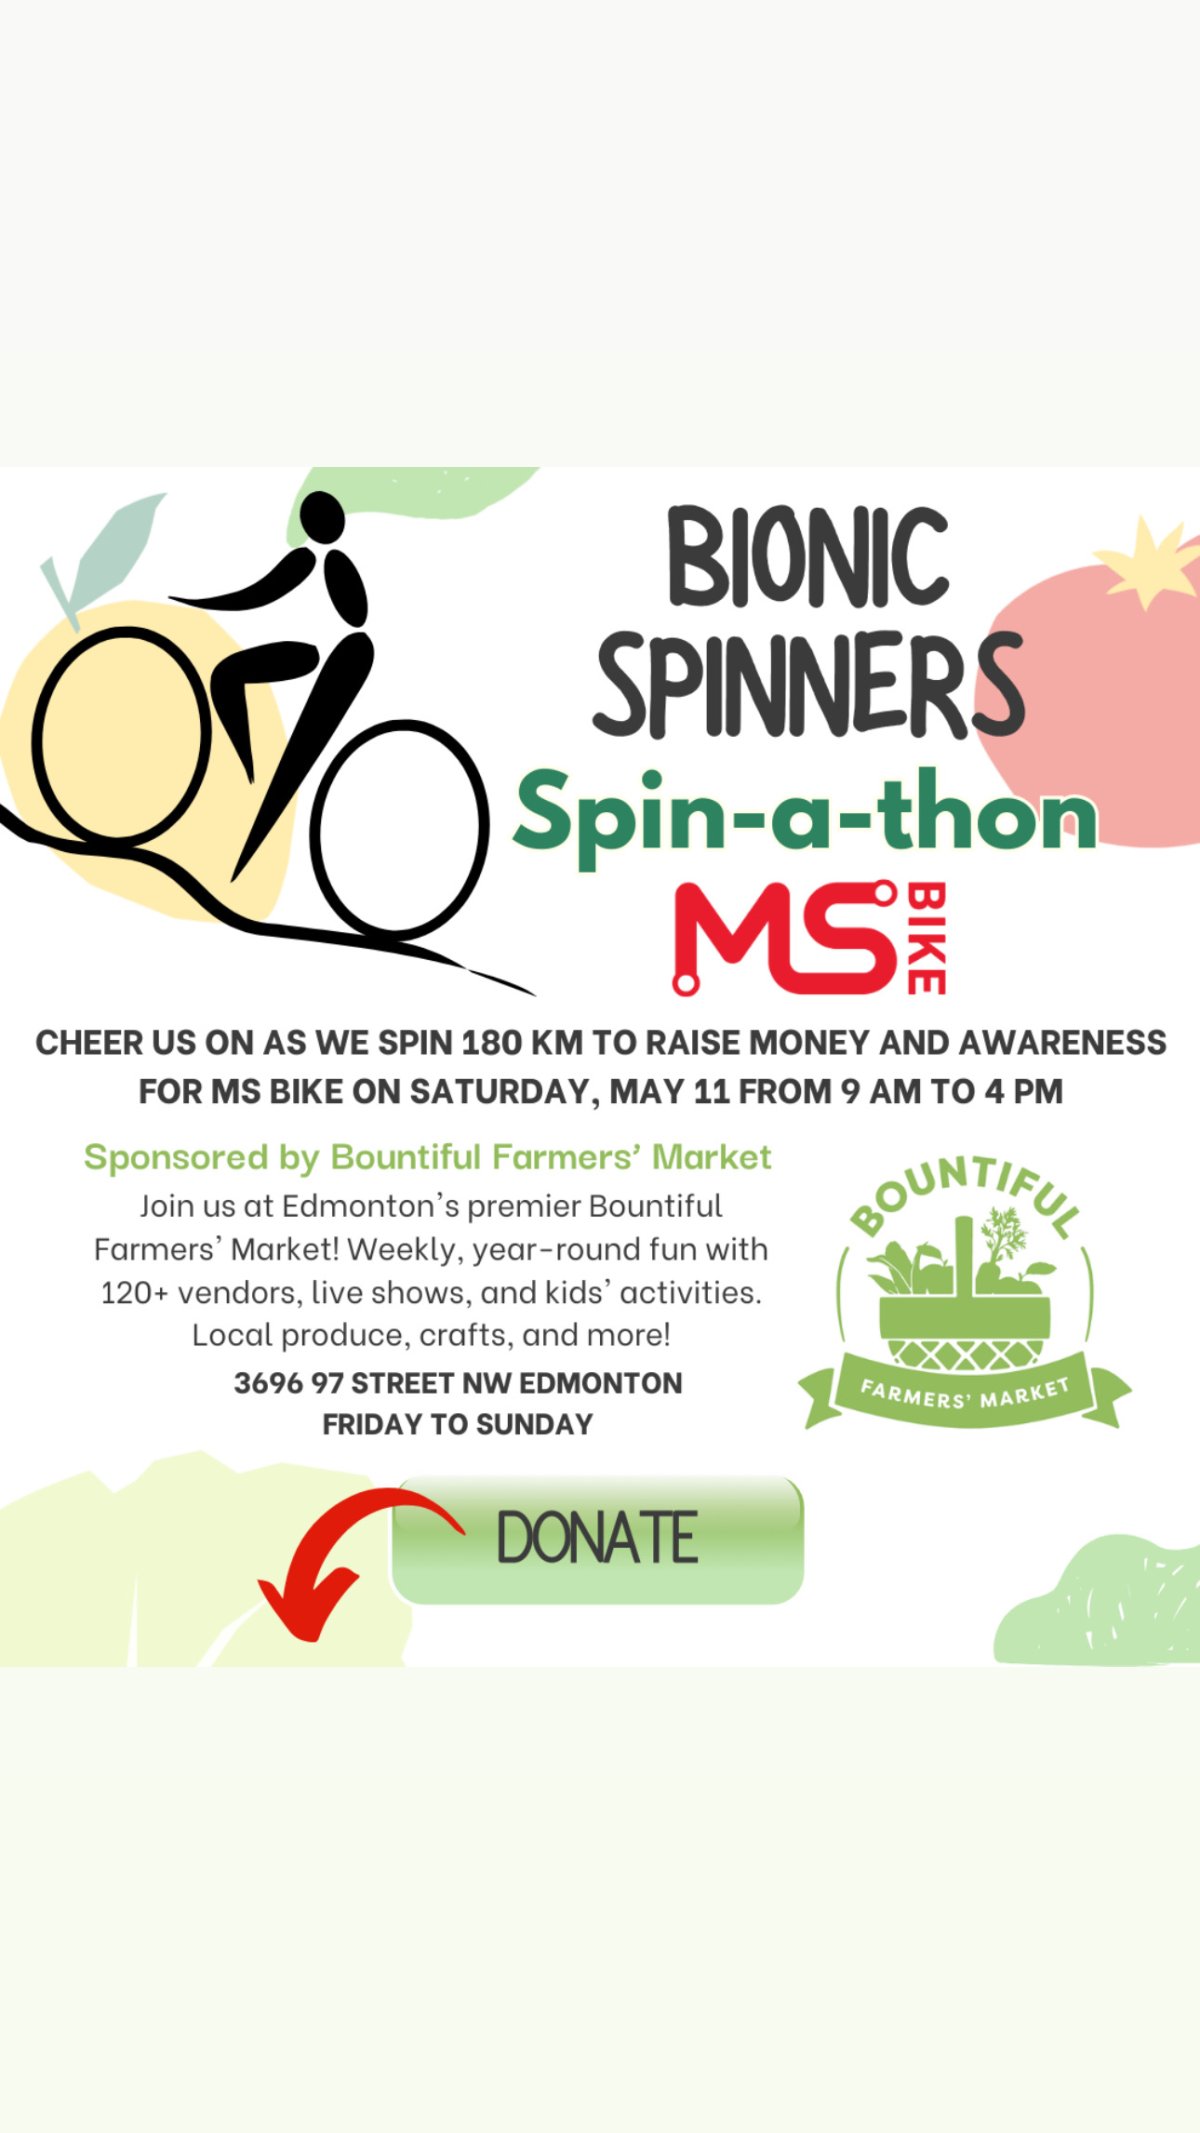 Bionic Spinners Spin-a-Thon for MS Bike - image